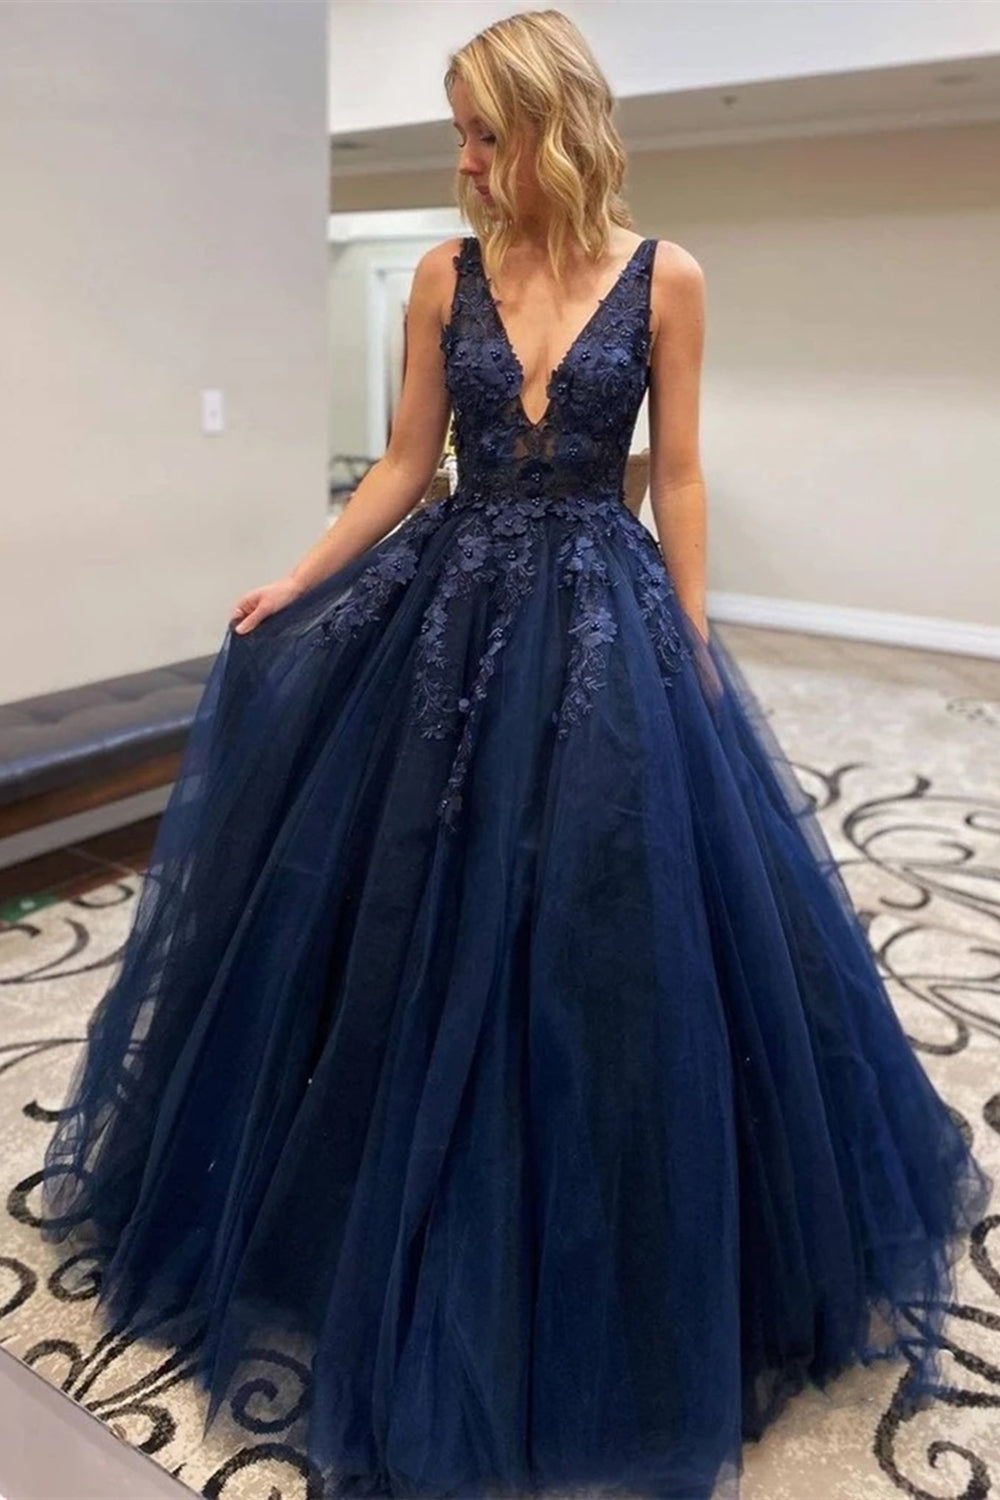 A Line V Neck Dark Blue Lace Beaded Prom Dresses, Dark Blue Lace Long Formal Evening Dresses